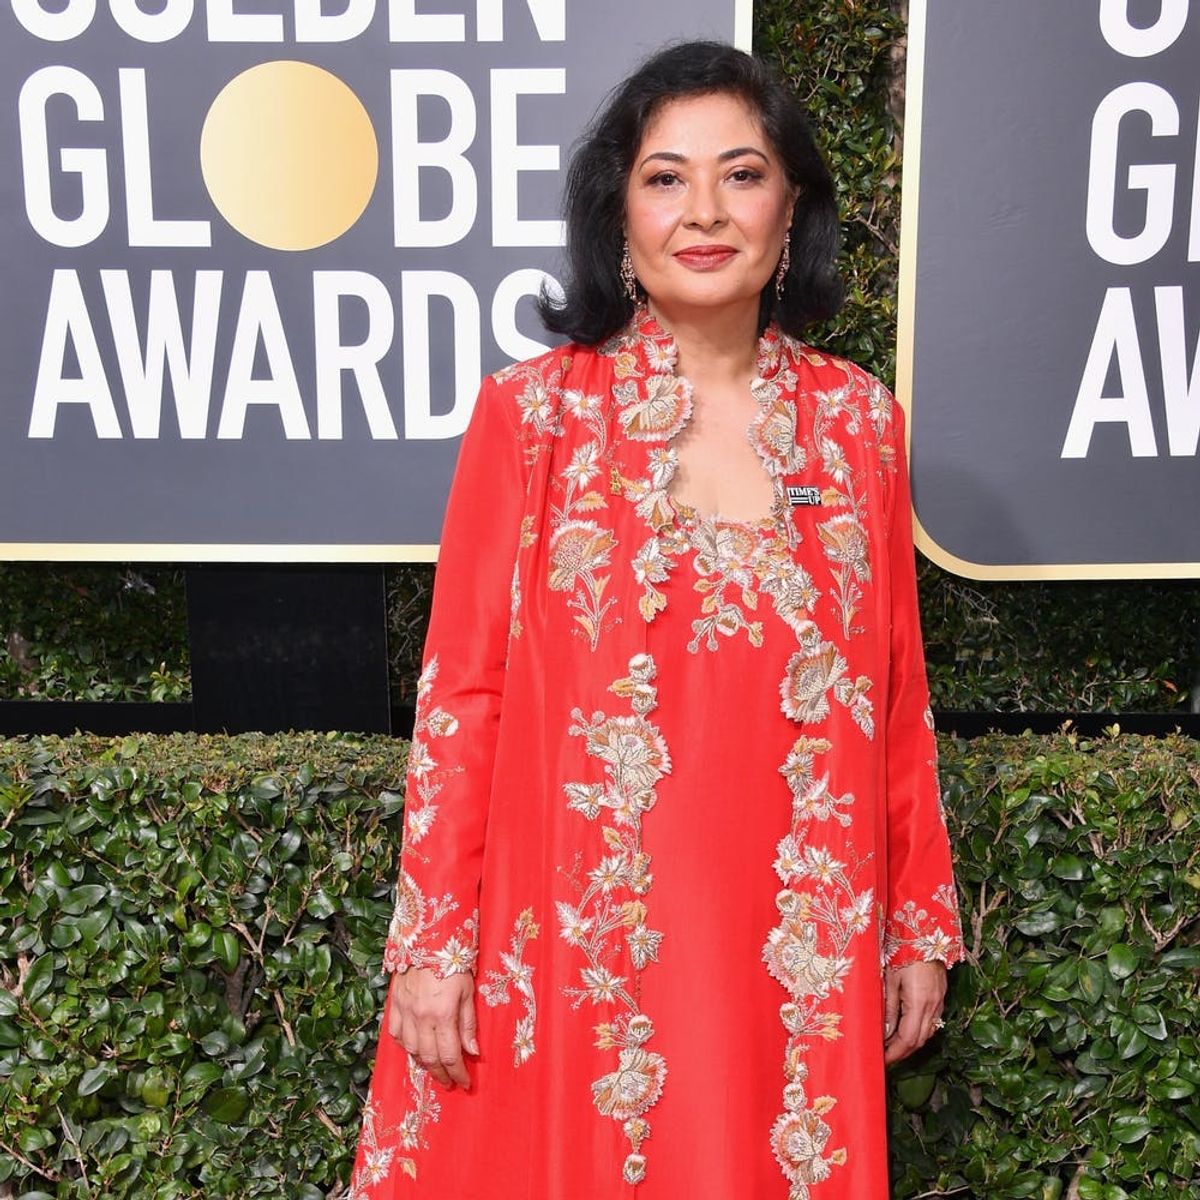 Here’s Why This Golden Globes Attendee Decided Not to Wear Black